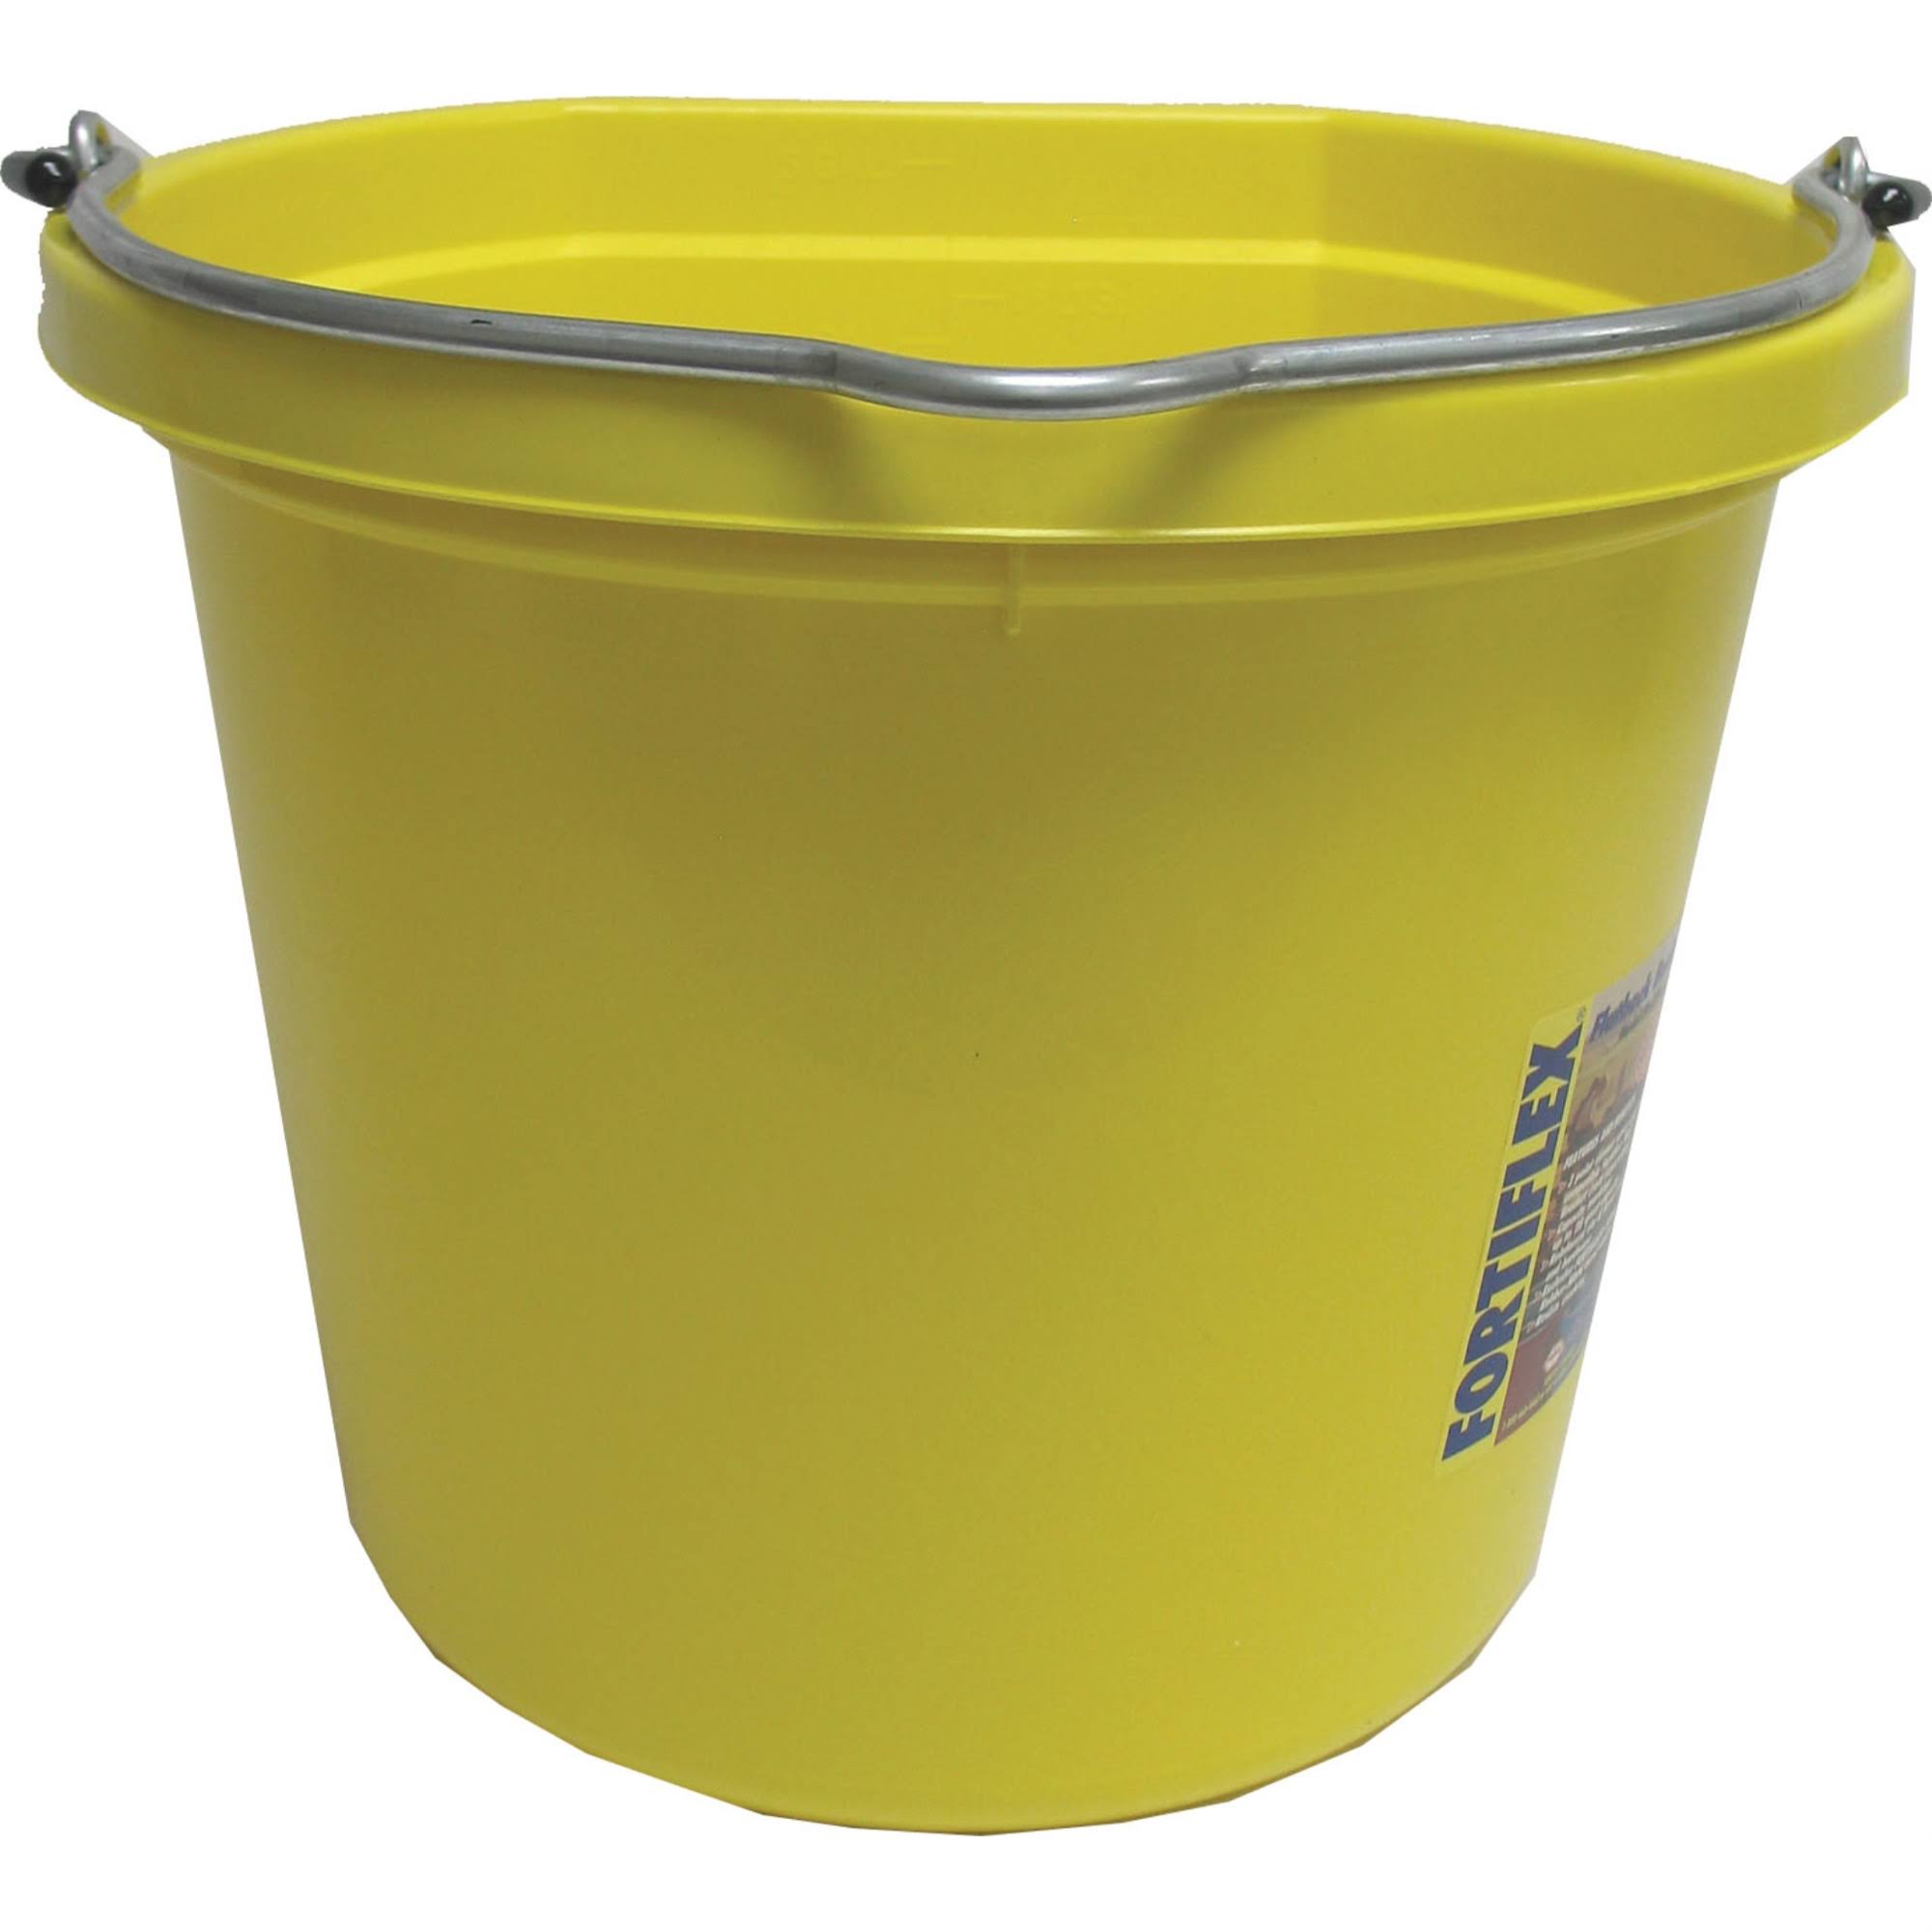 20 Quart Flat Back Bucket - Yellow - 1302044 Yellow | Bird | Free Shipping On All Orders | Delivery guaranteed | Best Price Guarantee